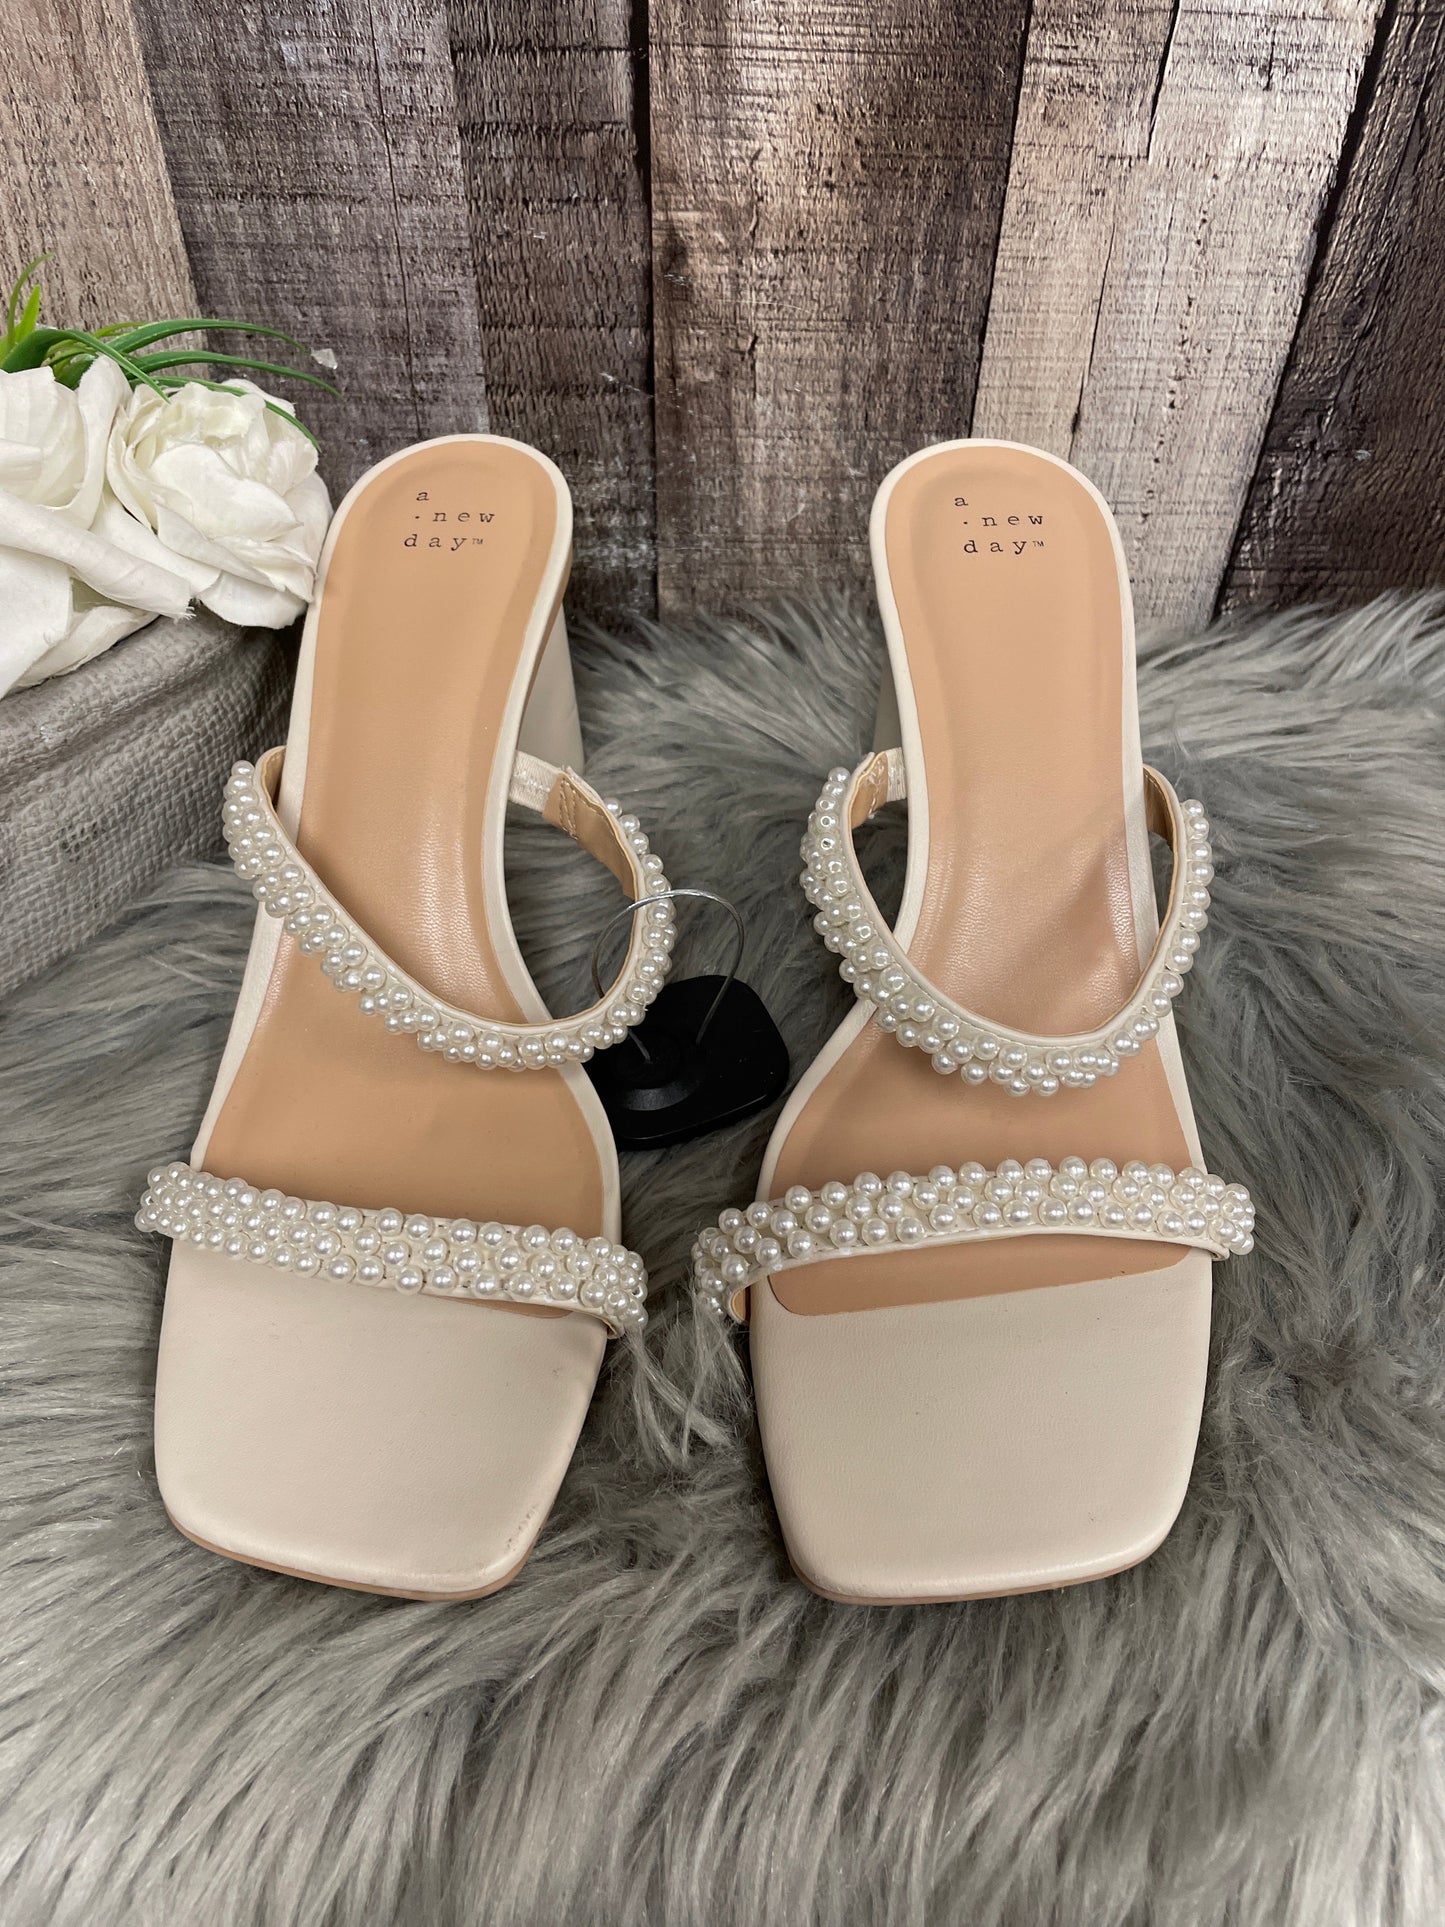 White Sandals Heels Block A New Day, Size 11